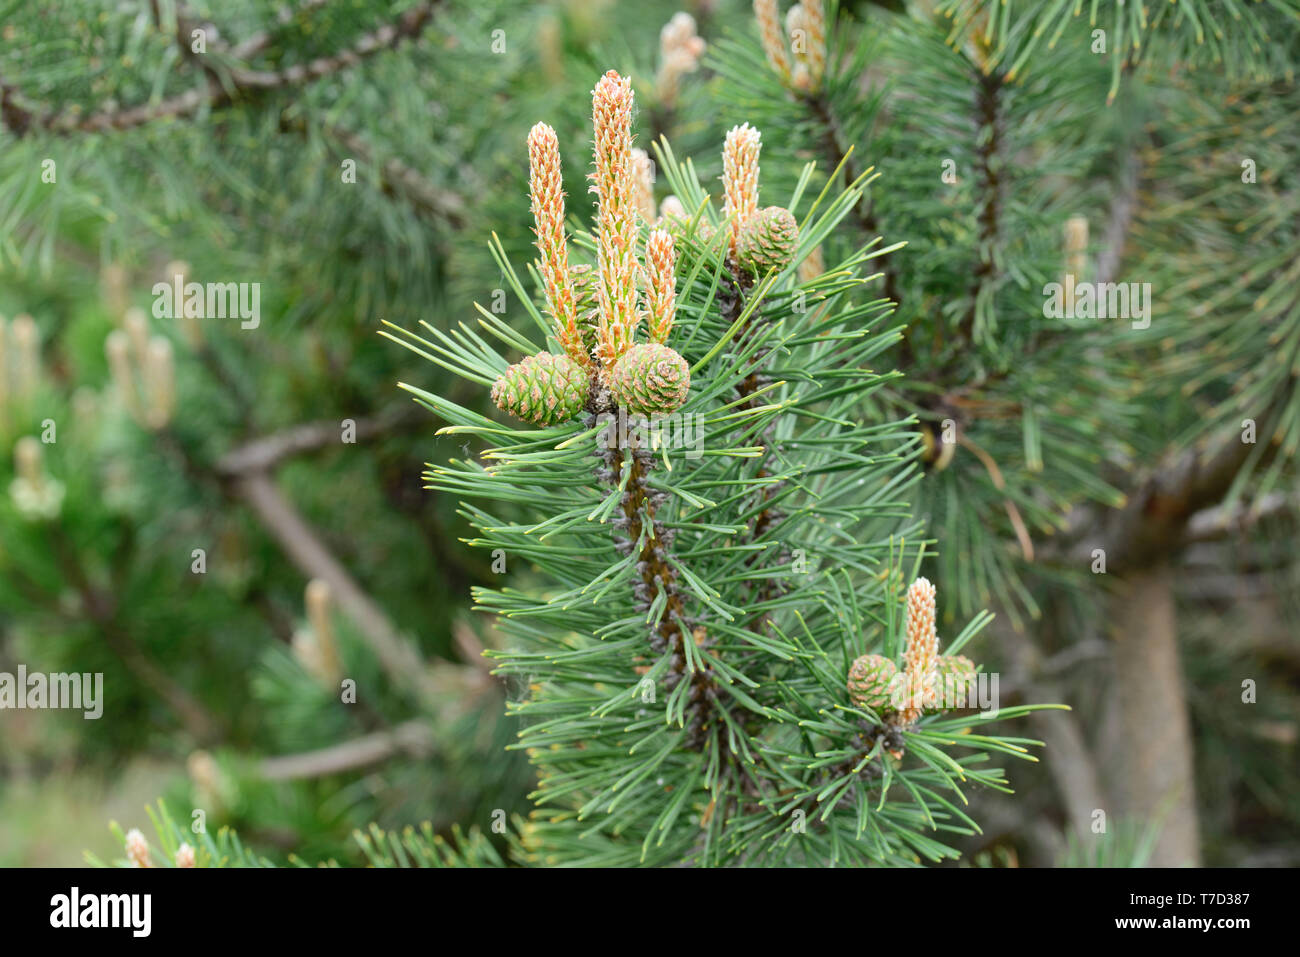 pinus mugo, pine young cones and shoots on tree branches macro Stock Photo